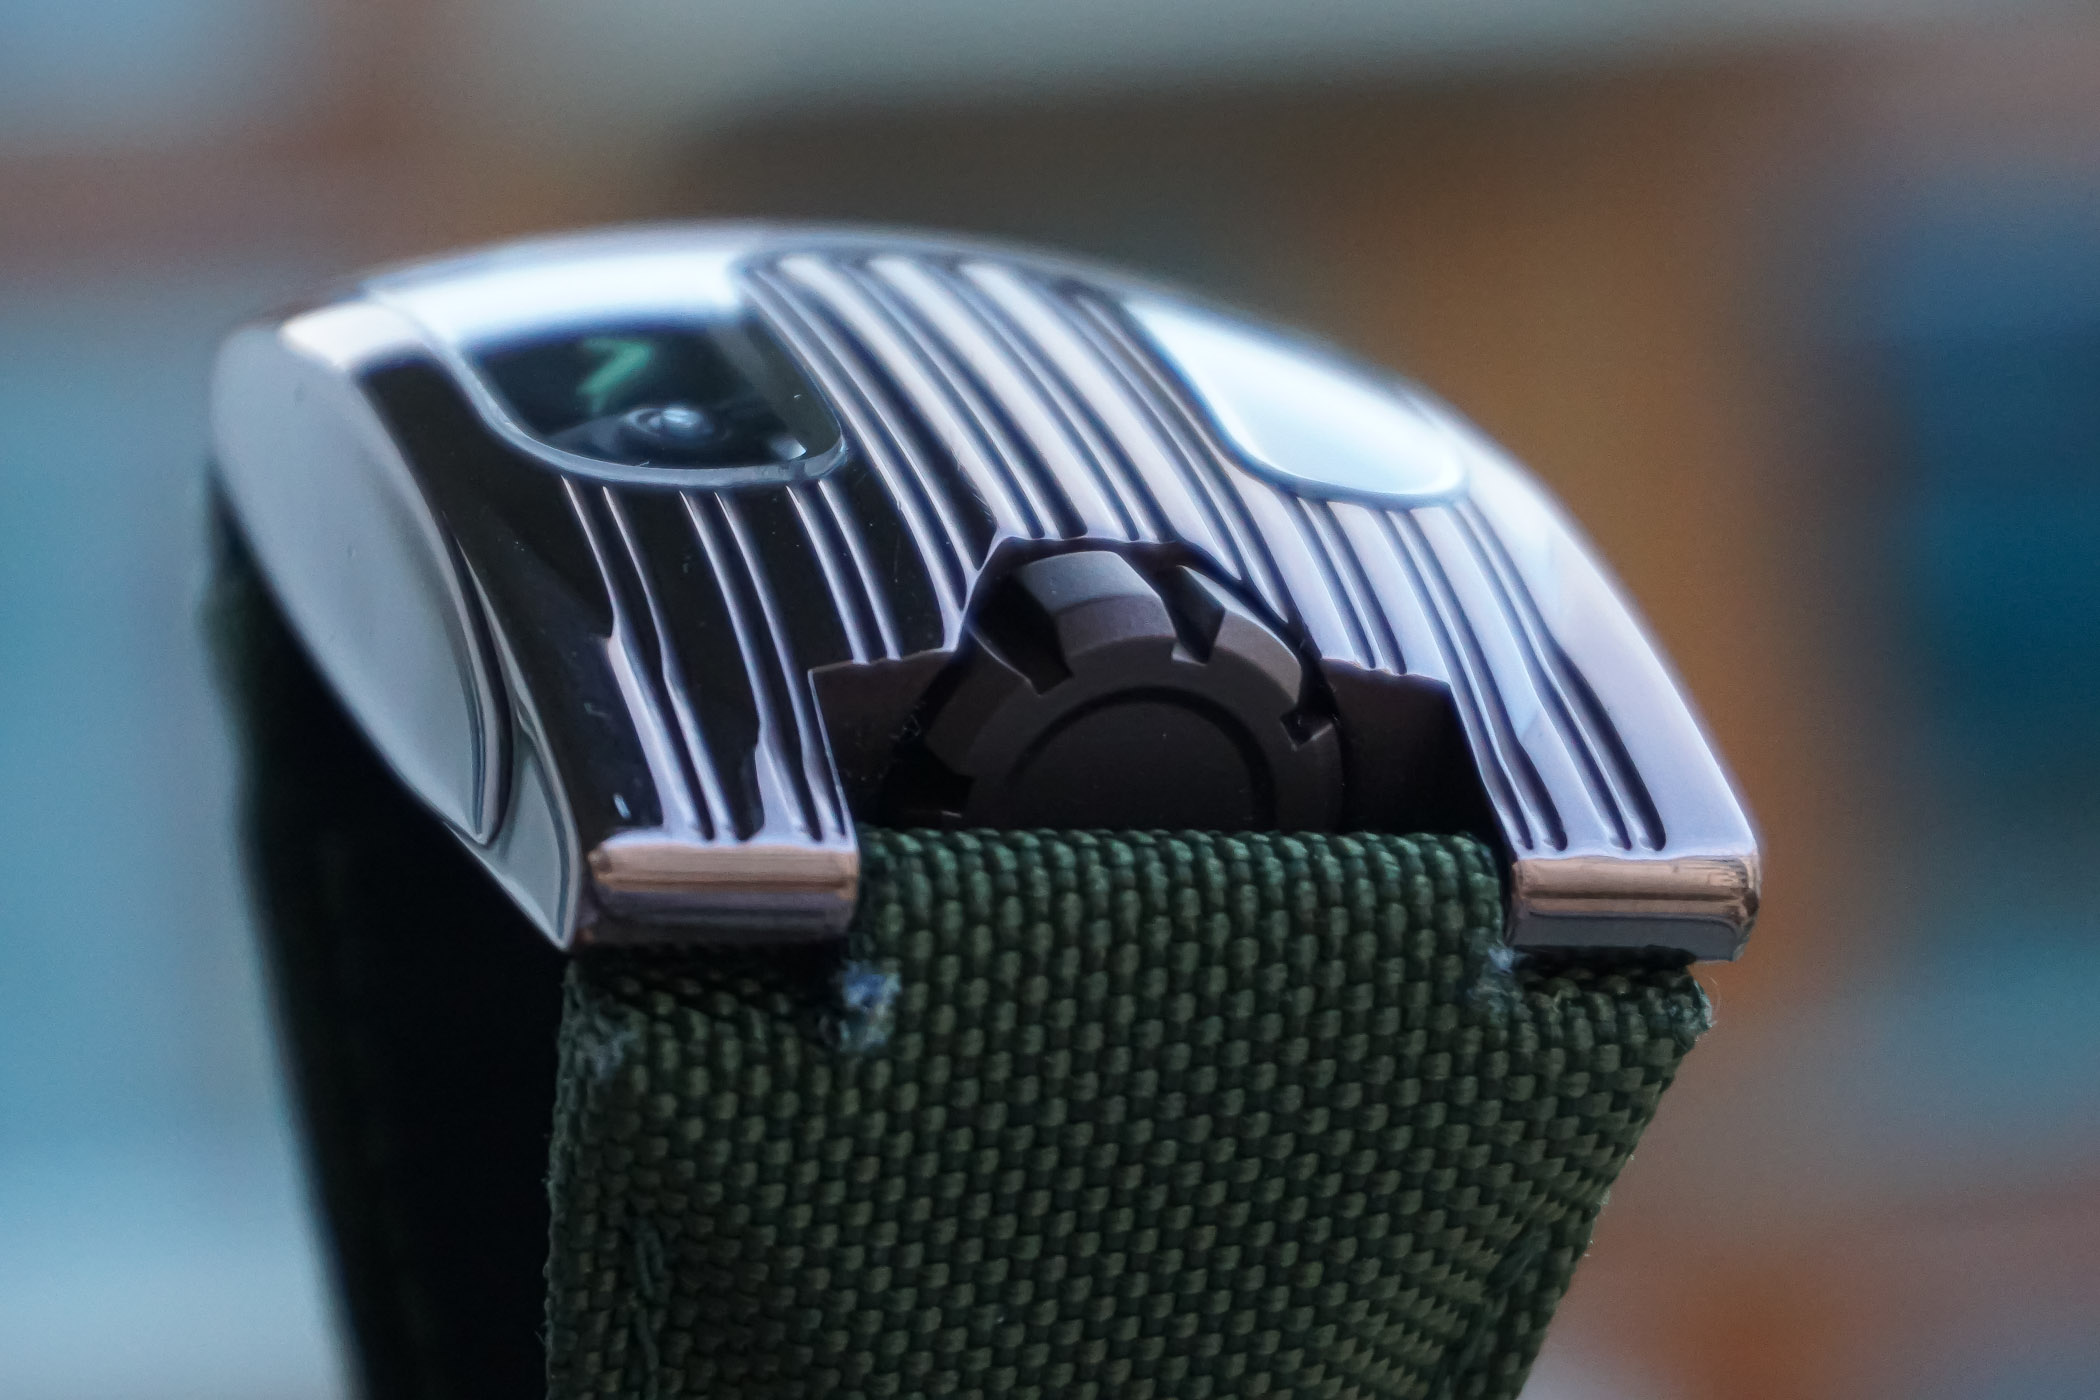 Up Close and Personal with the URWERK UR-103-08 - 9